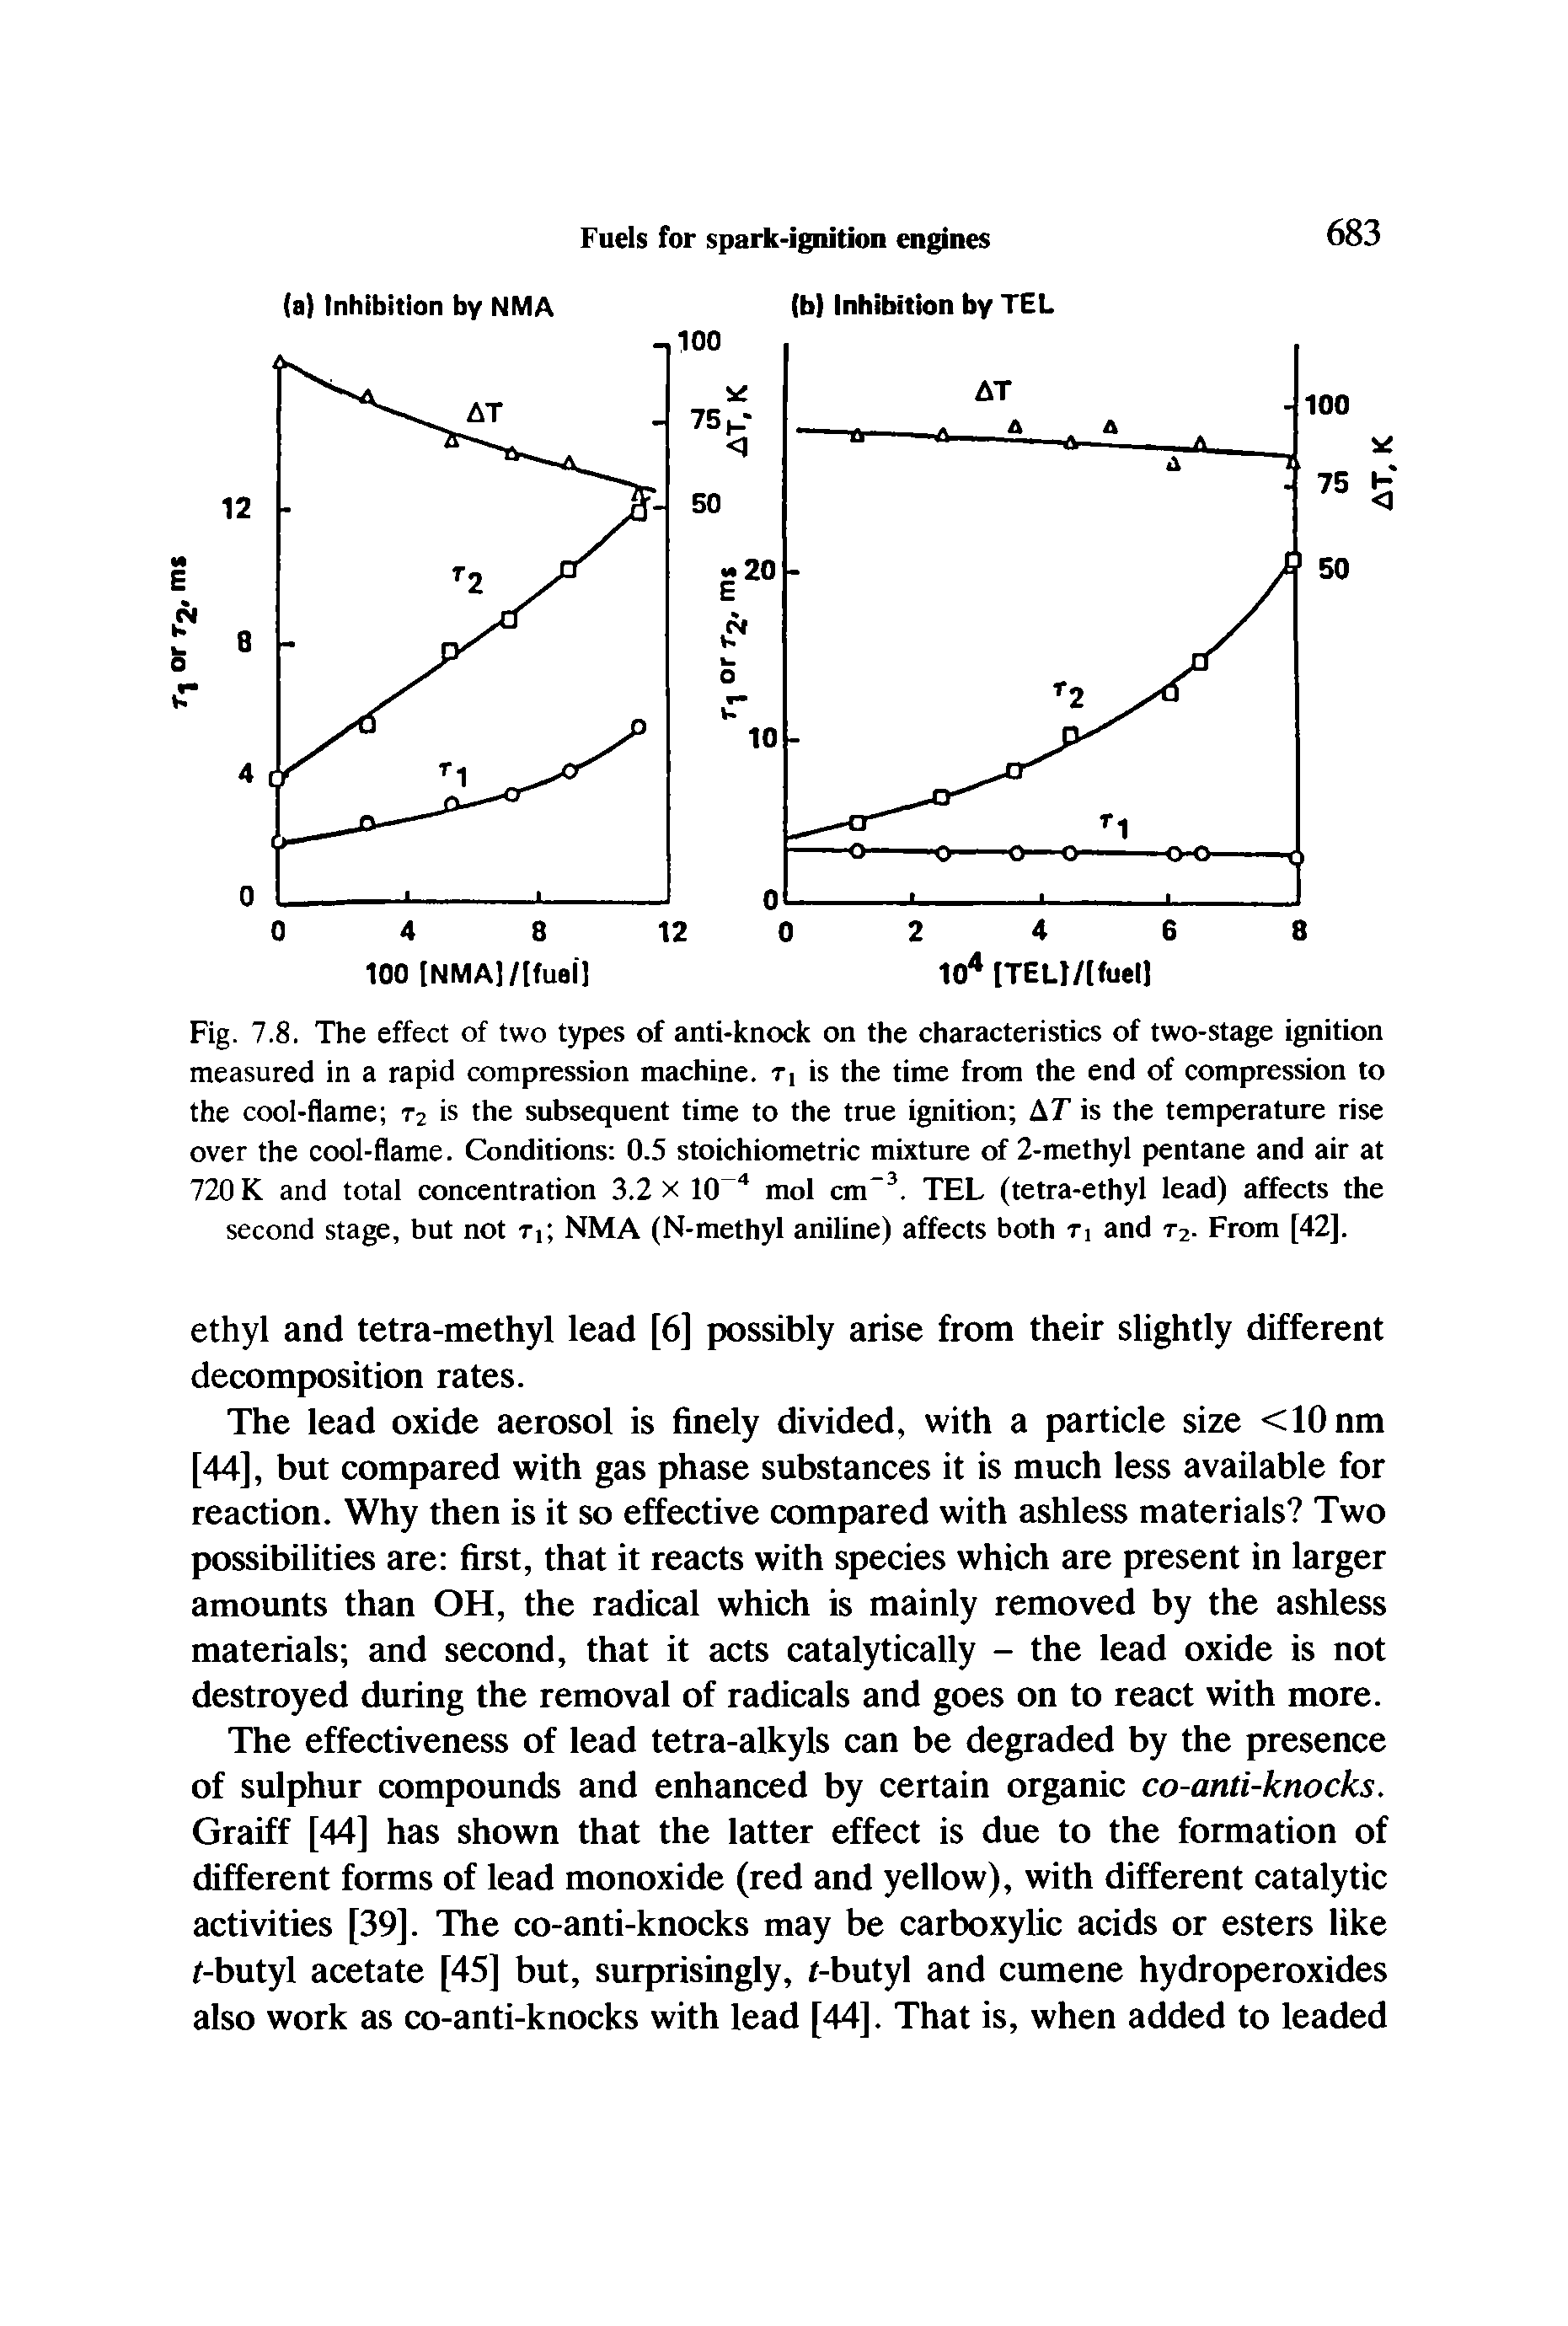 Fig. 7.8. The effect of two types of anti-knock on the characteristics of two-stage ignition measured in a rapid compression machine. Ti is the time from the end of compression to the cool-flame is the subsequent time to the true ignition AT is the temperature rise over the cool-flame. Conditions 0.5 stoichiometric mixture of 2-methyl pentane and air at 720 K and total concentration 3.2 x 10 mol cm . TEL (tetra-ethyl lead) affects the second stage, but not ti, NMA (N-methyl aniline) affects both ti and t2. From [42],...